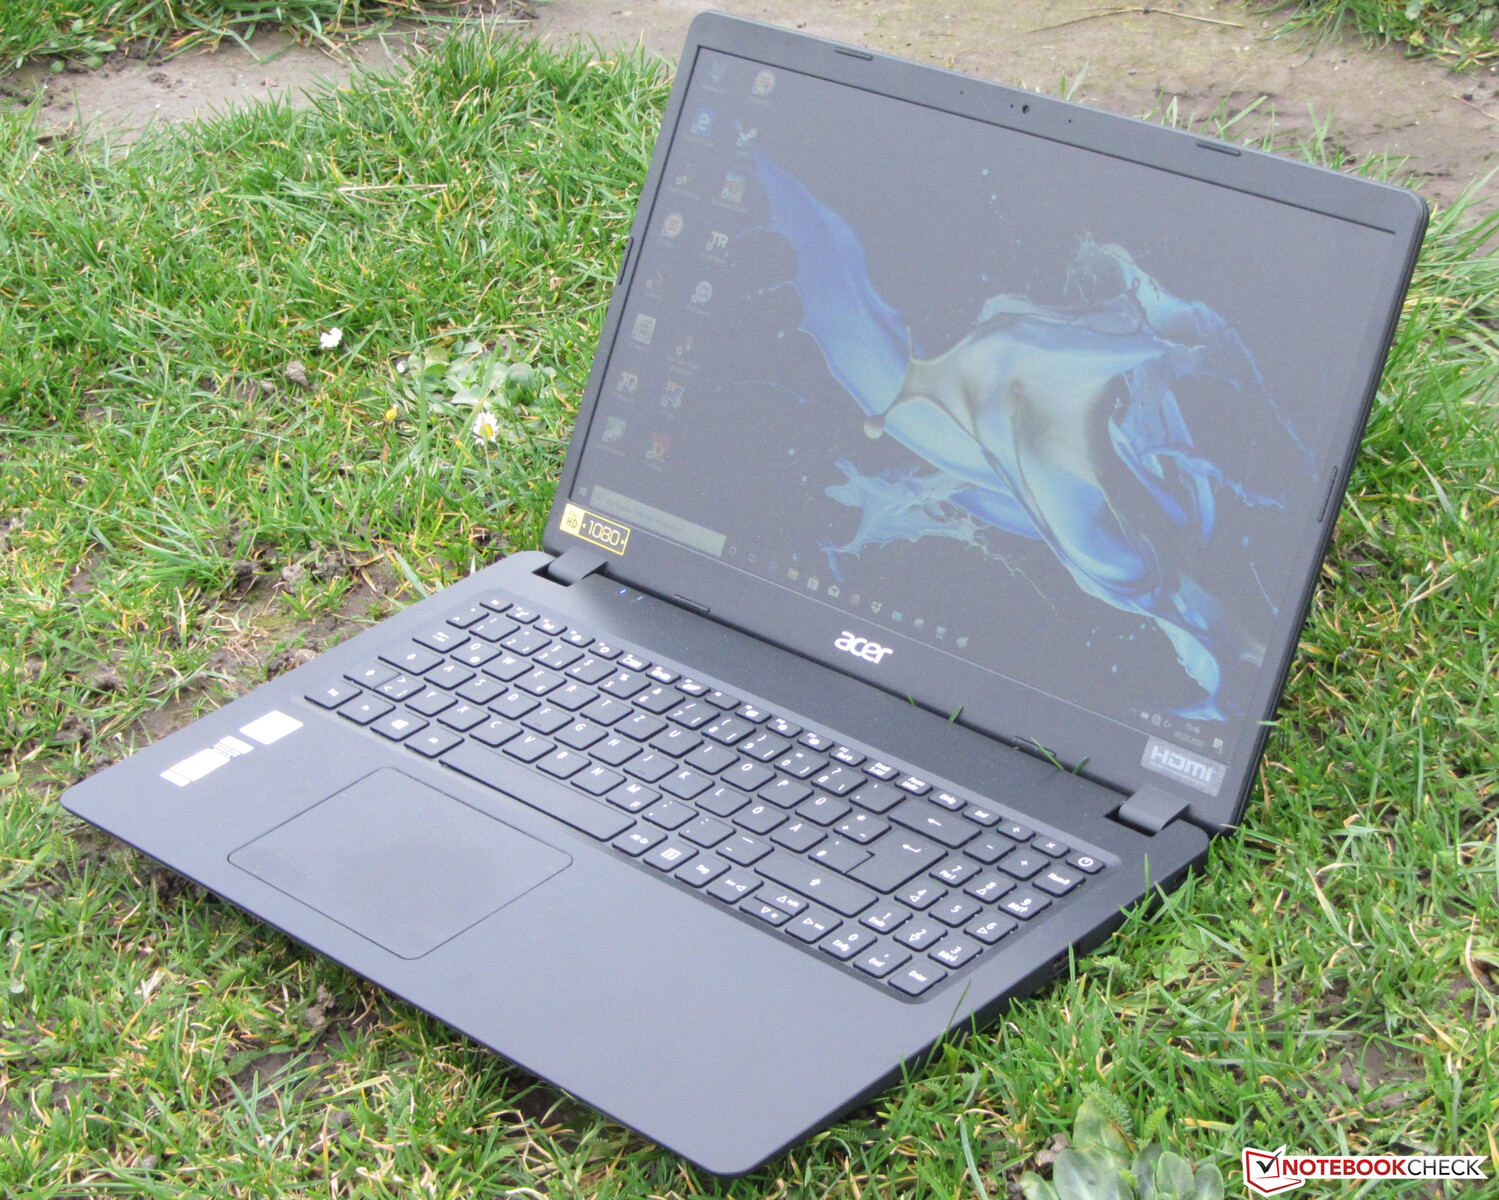 Only single-channel RAM - review of the Acer Extensa 15 EX215-51